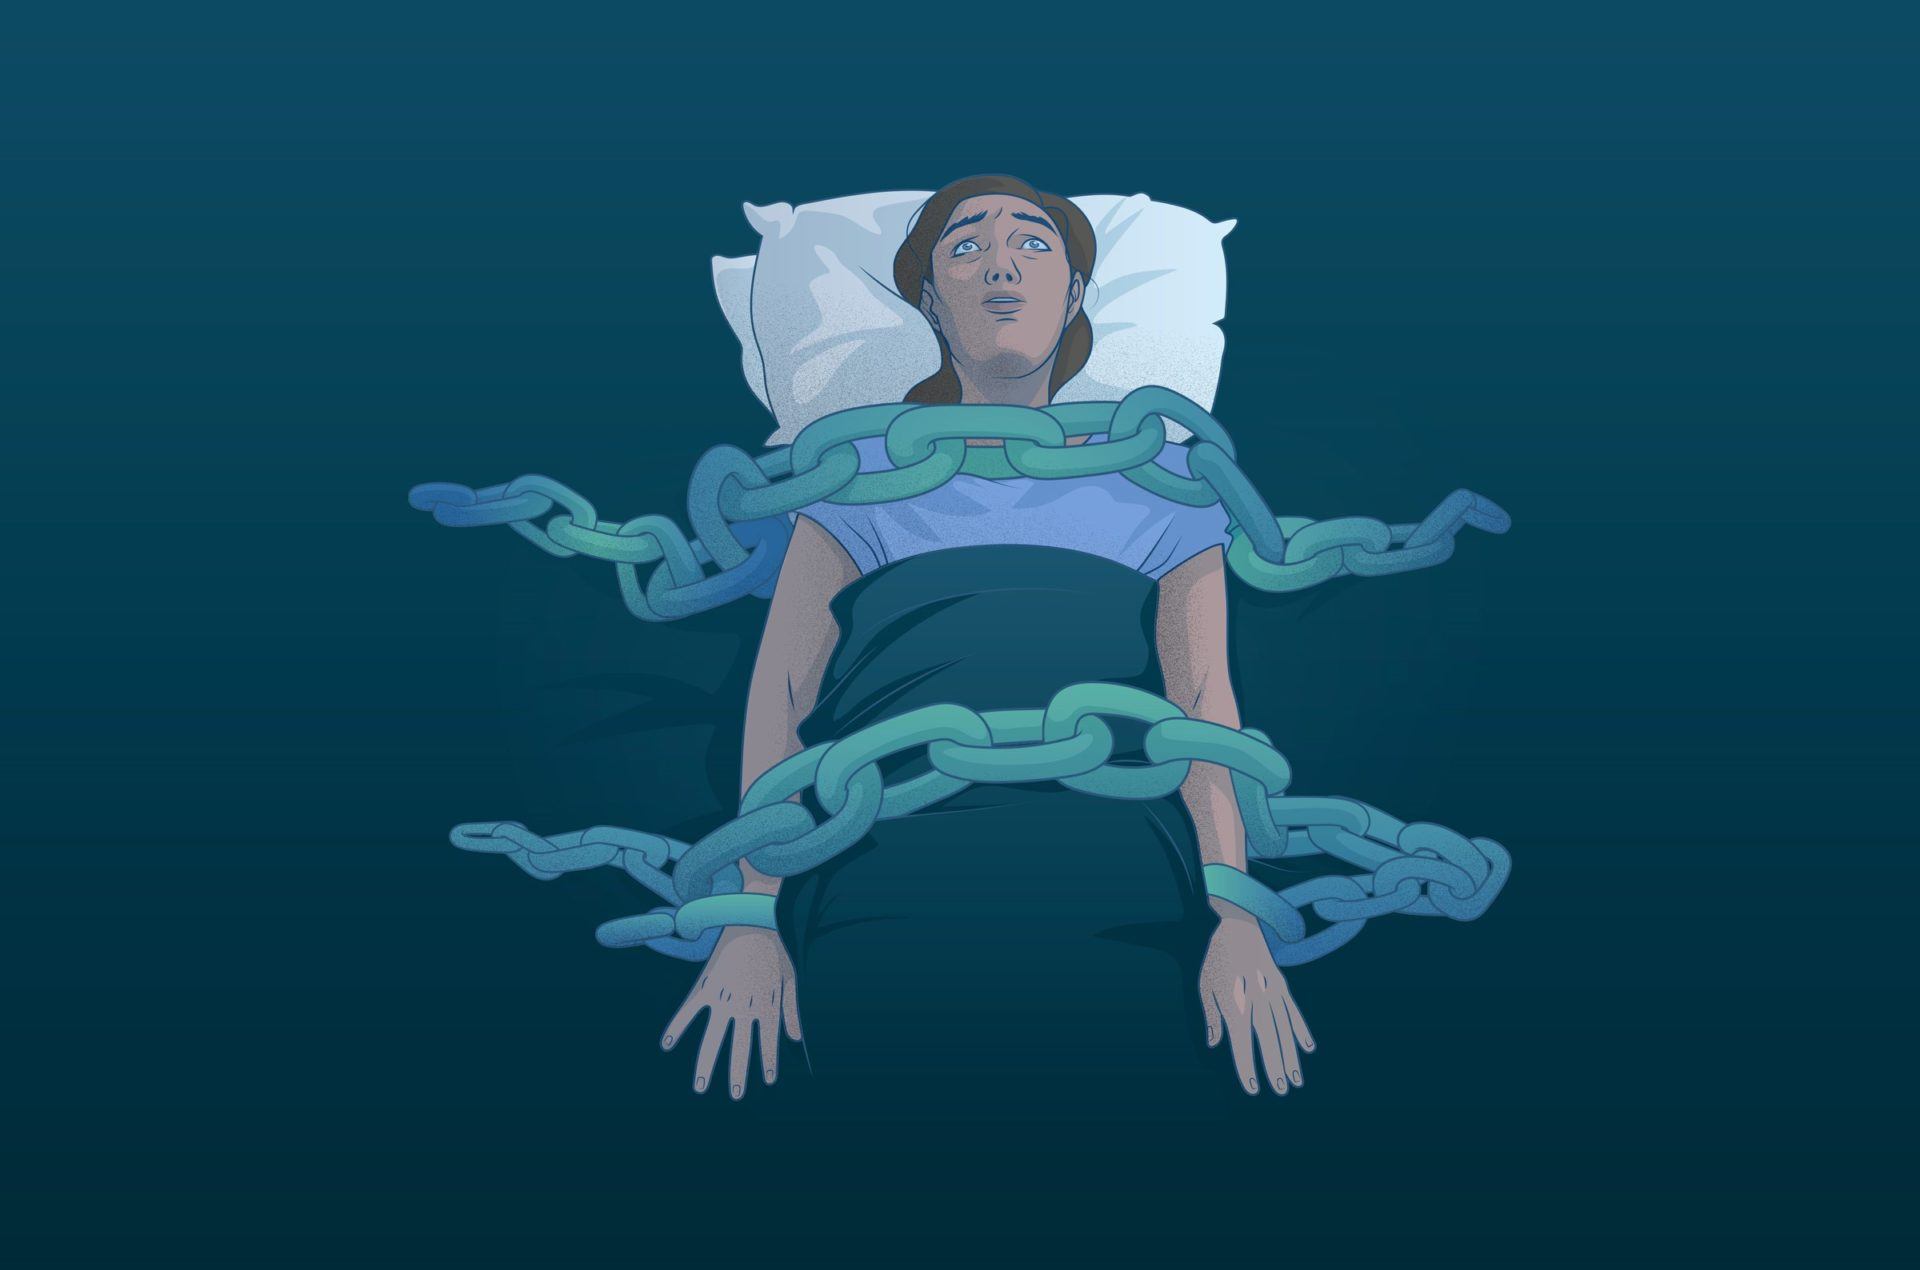 What is a sleep paralysis?